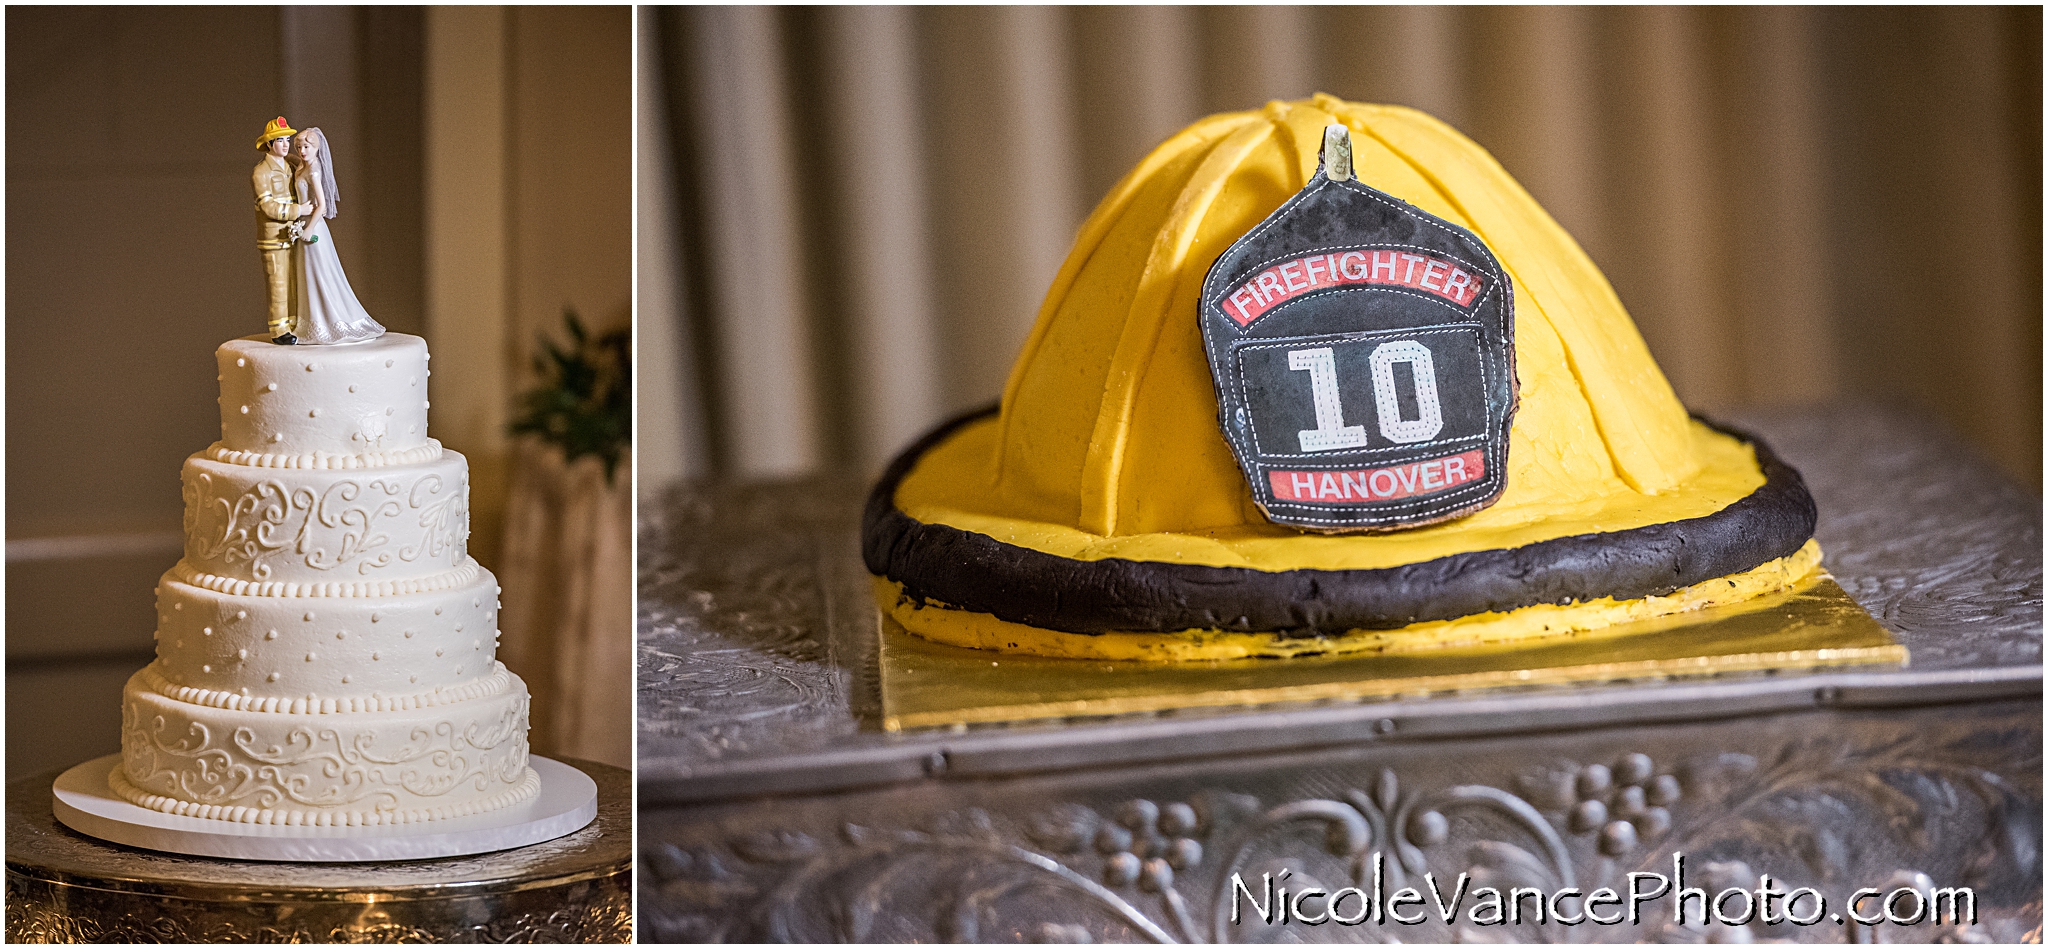 This classic wedding cake is topped with a very special cake topper featuring a firefighter. The grooms cake was also firefighter themed.